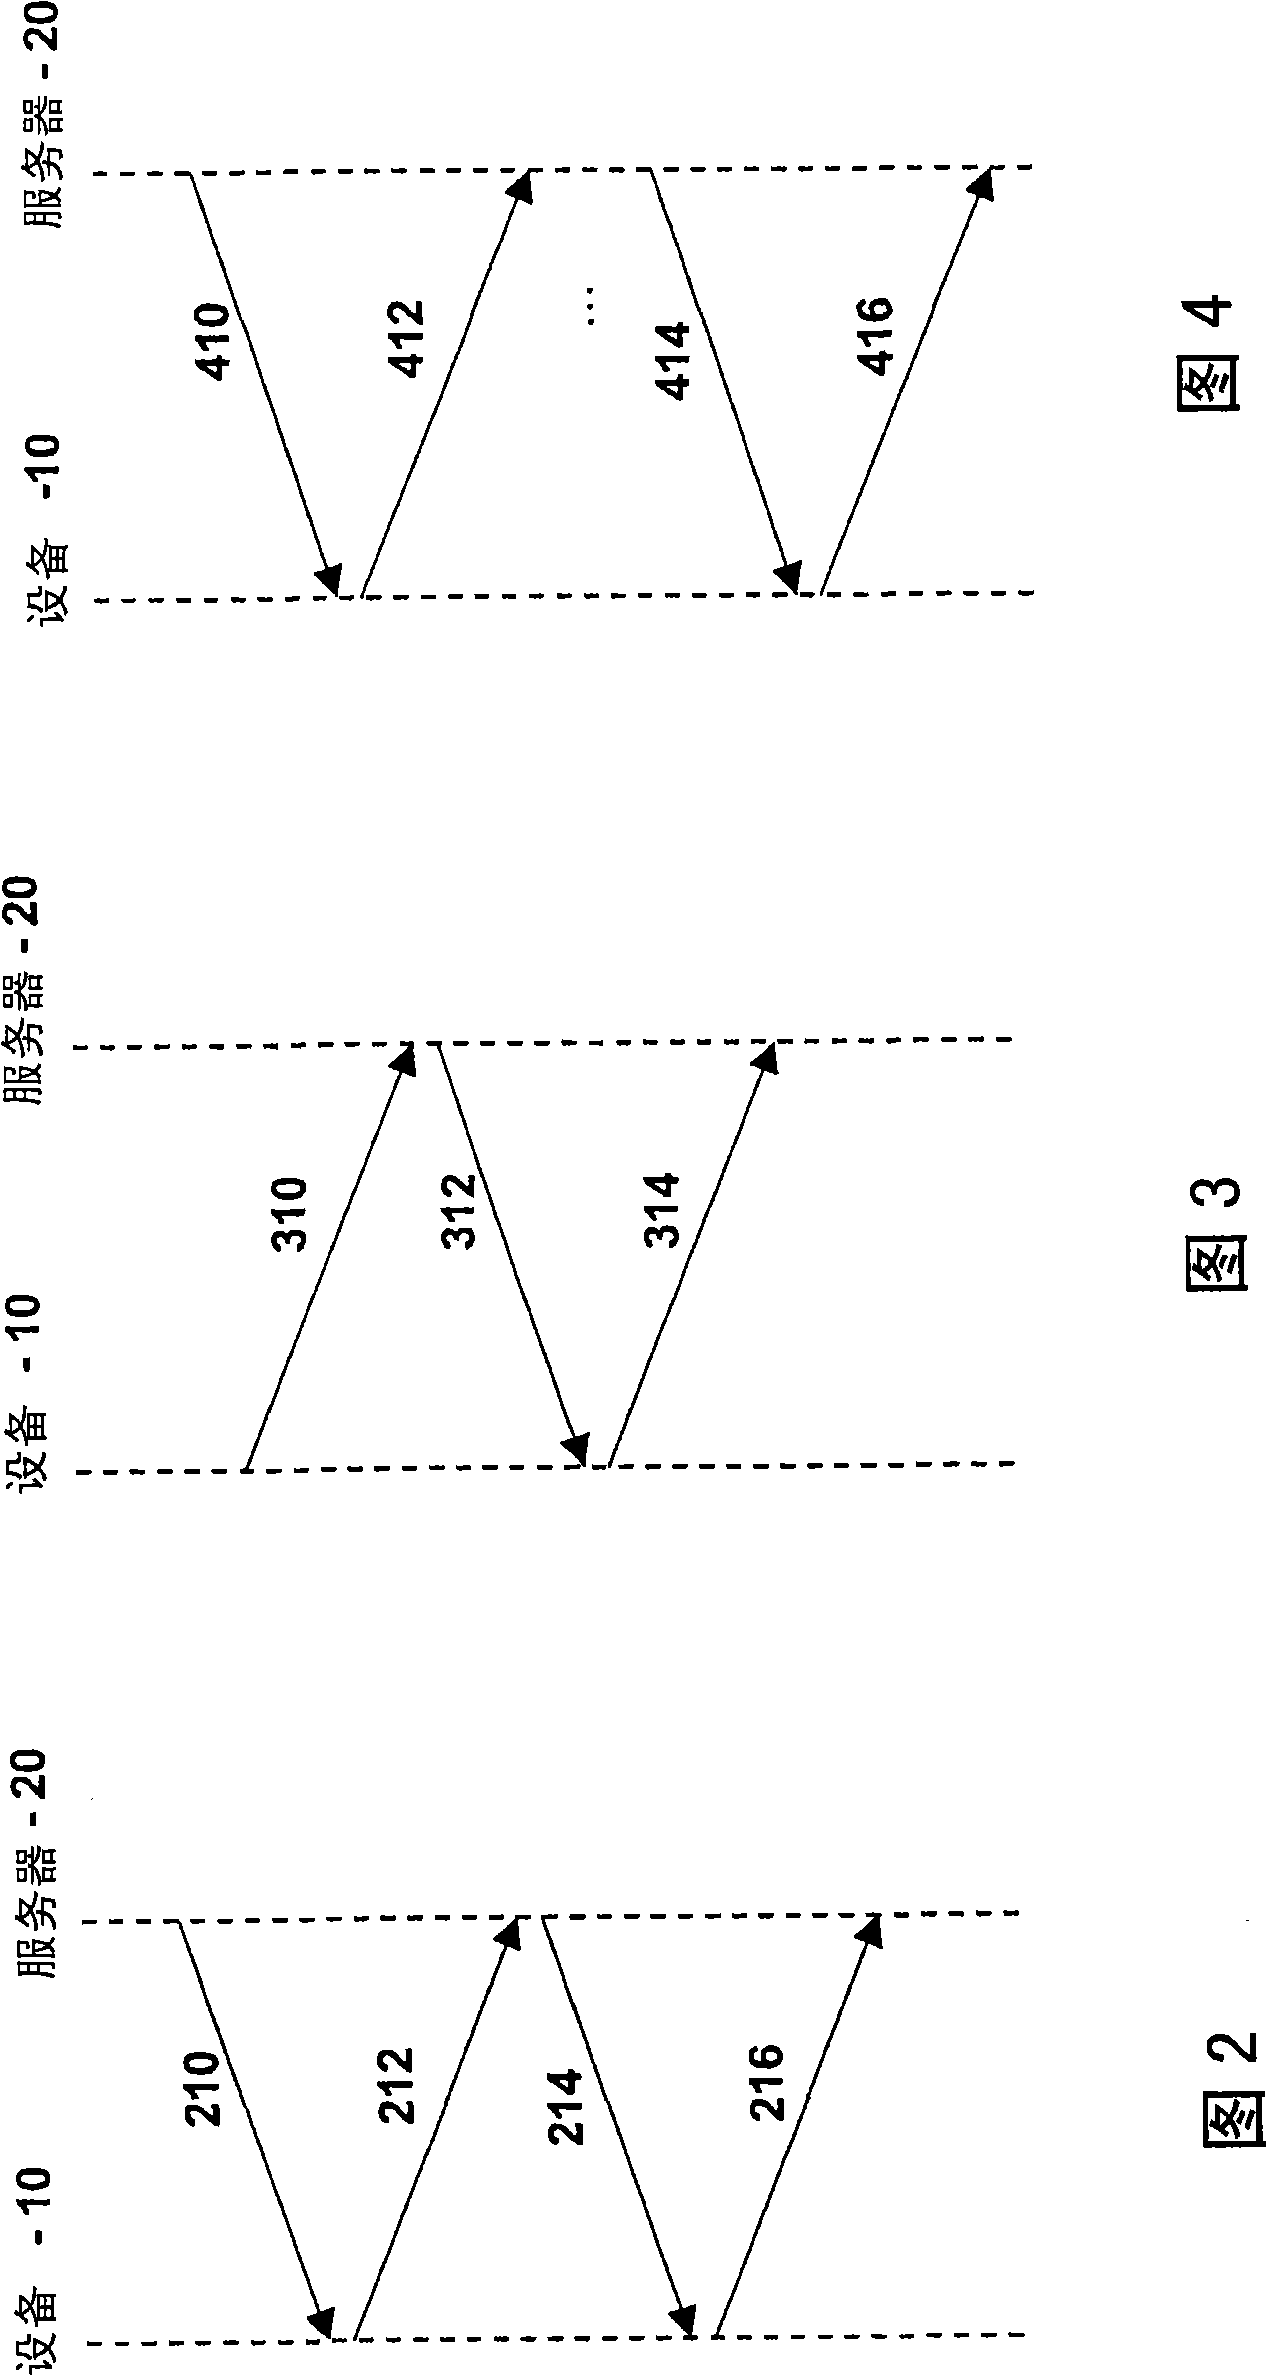 System and method for correlating messages within a wireless transaction